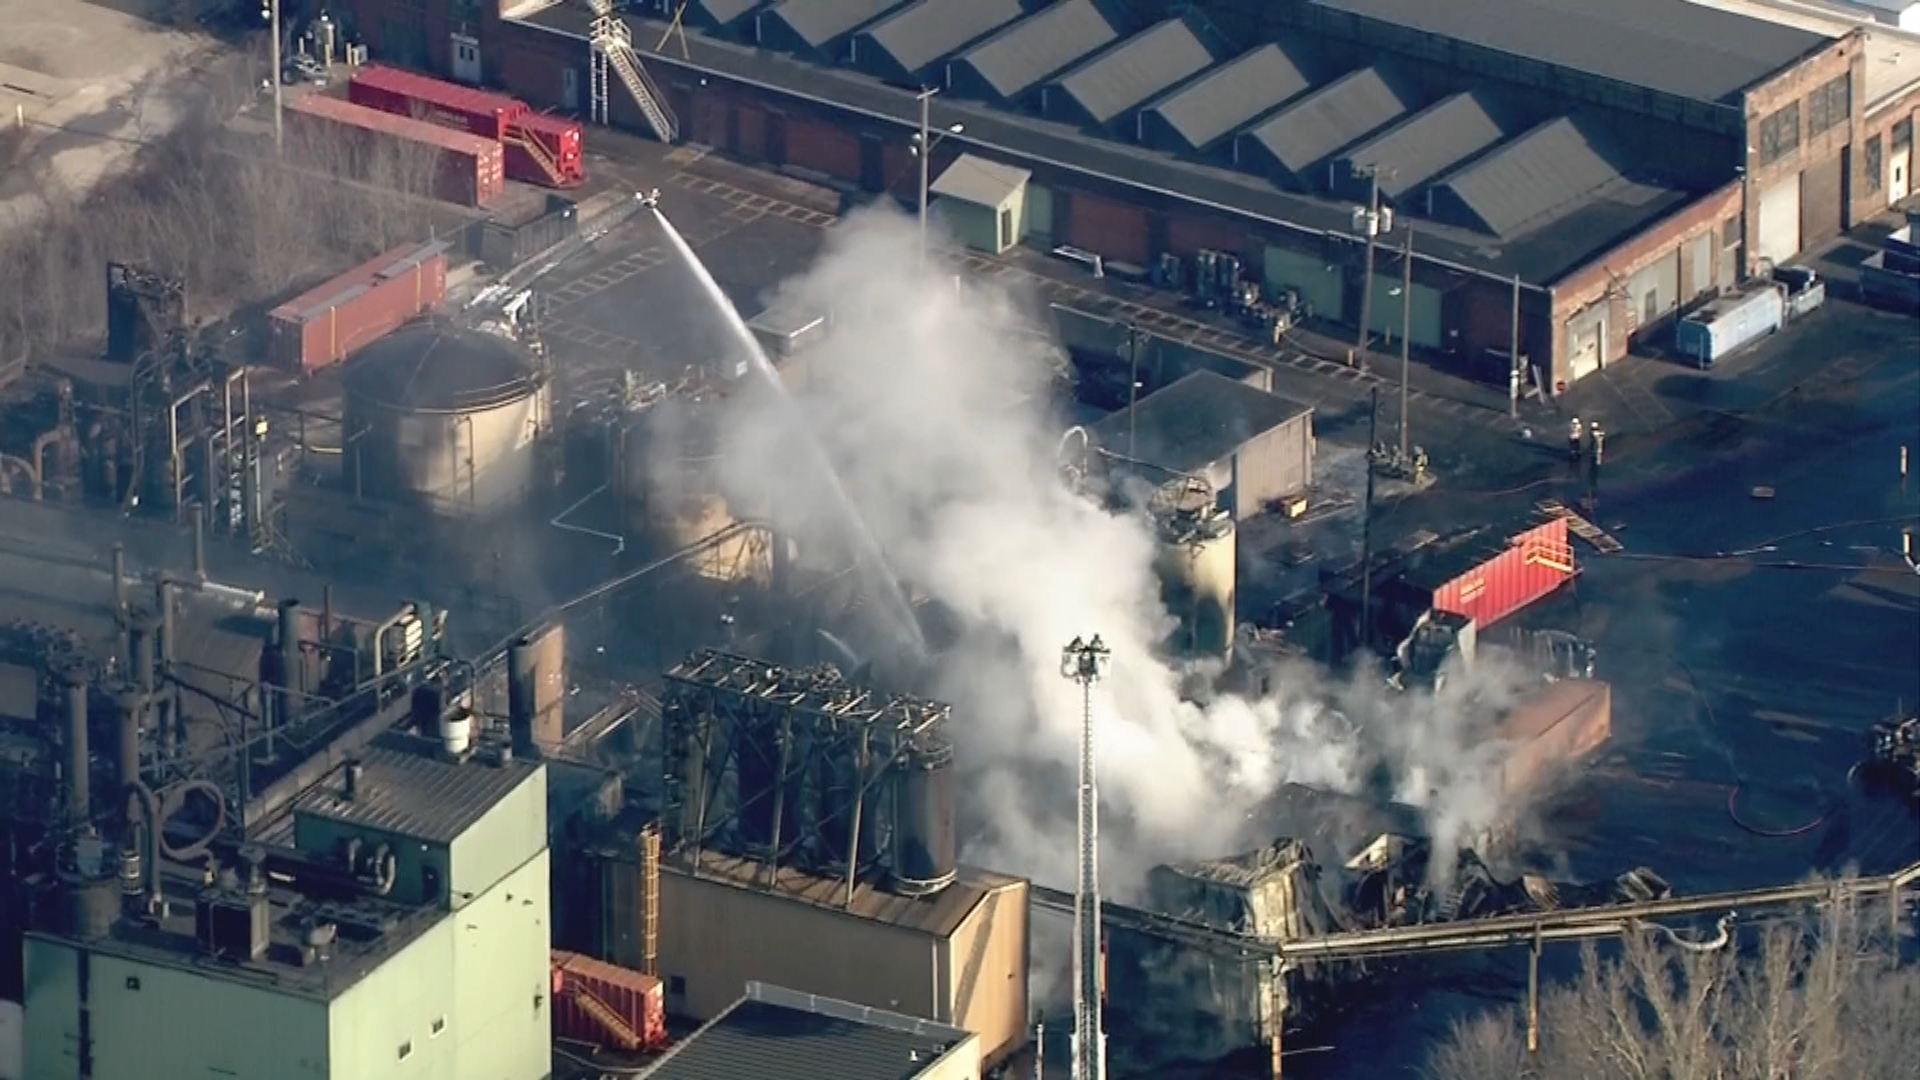 Photos: Images Show Scene of Fire, Explosion at LaSalle Chemical Plant